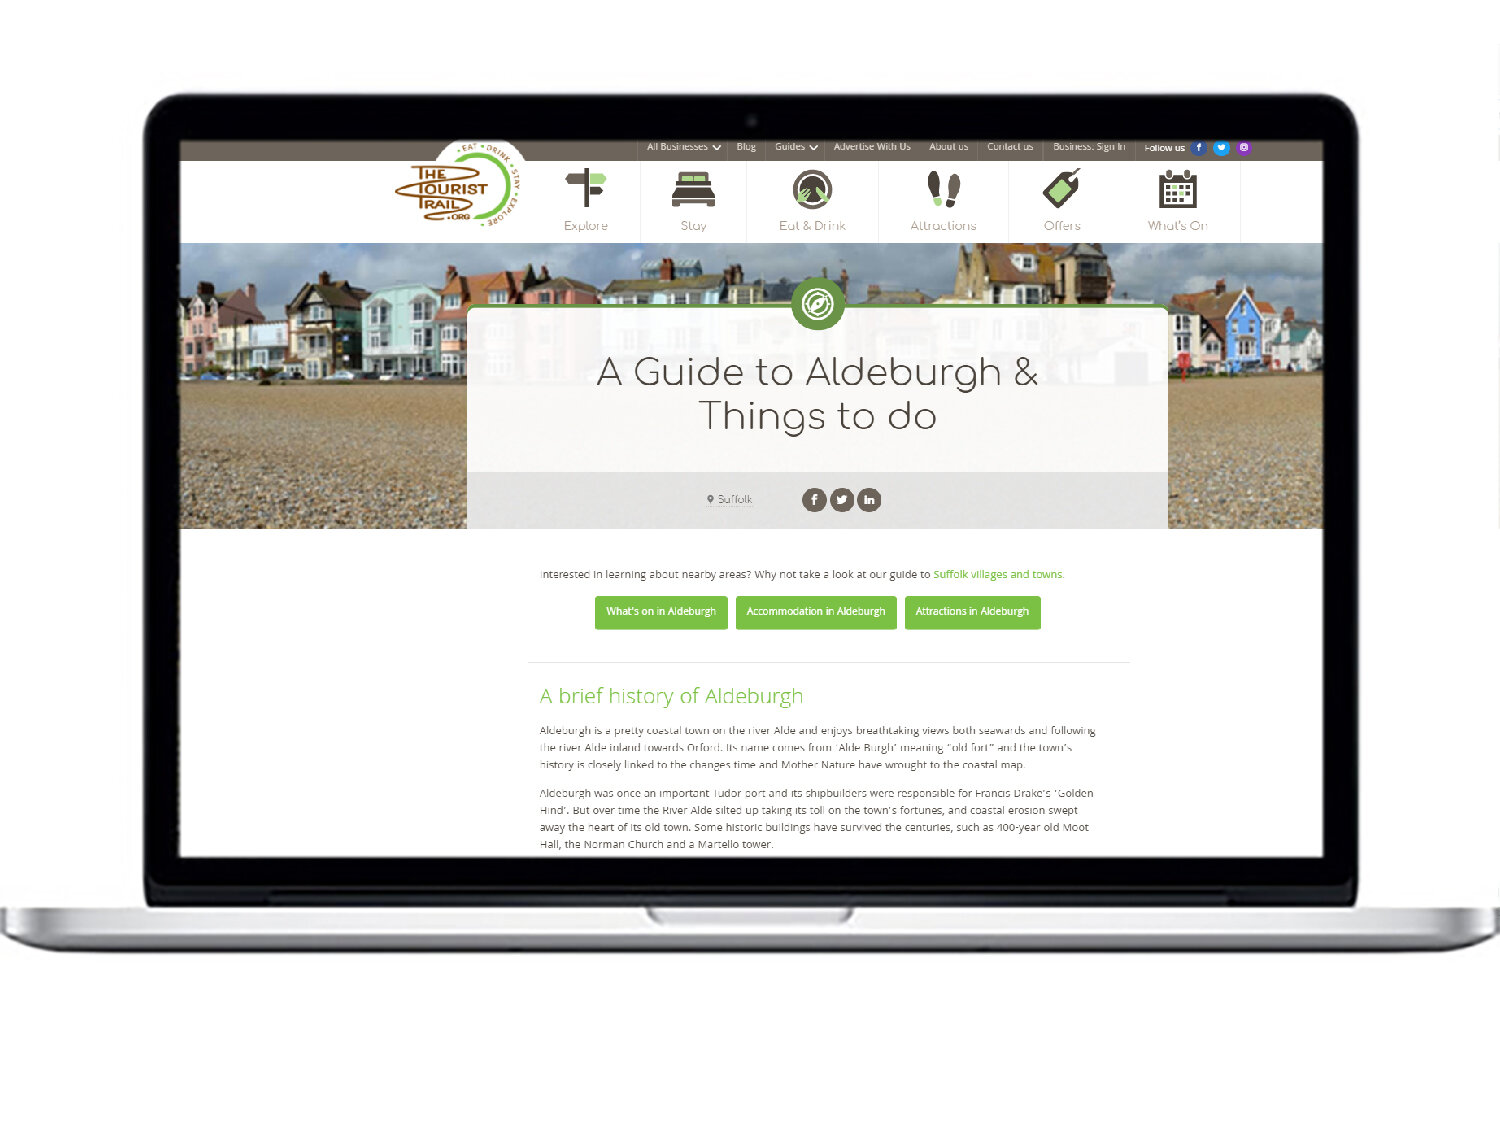 Aldeburgh seaside town. Beach, Arts and culture restaurants and shops. 1 Hour drive